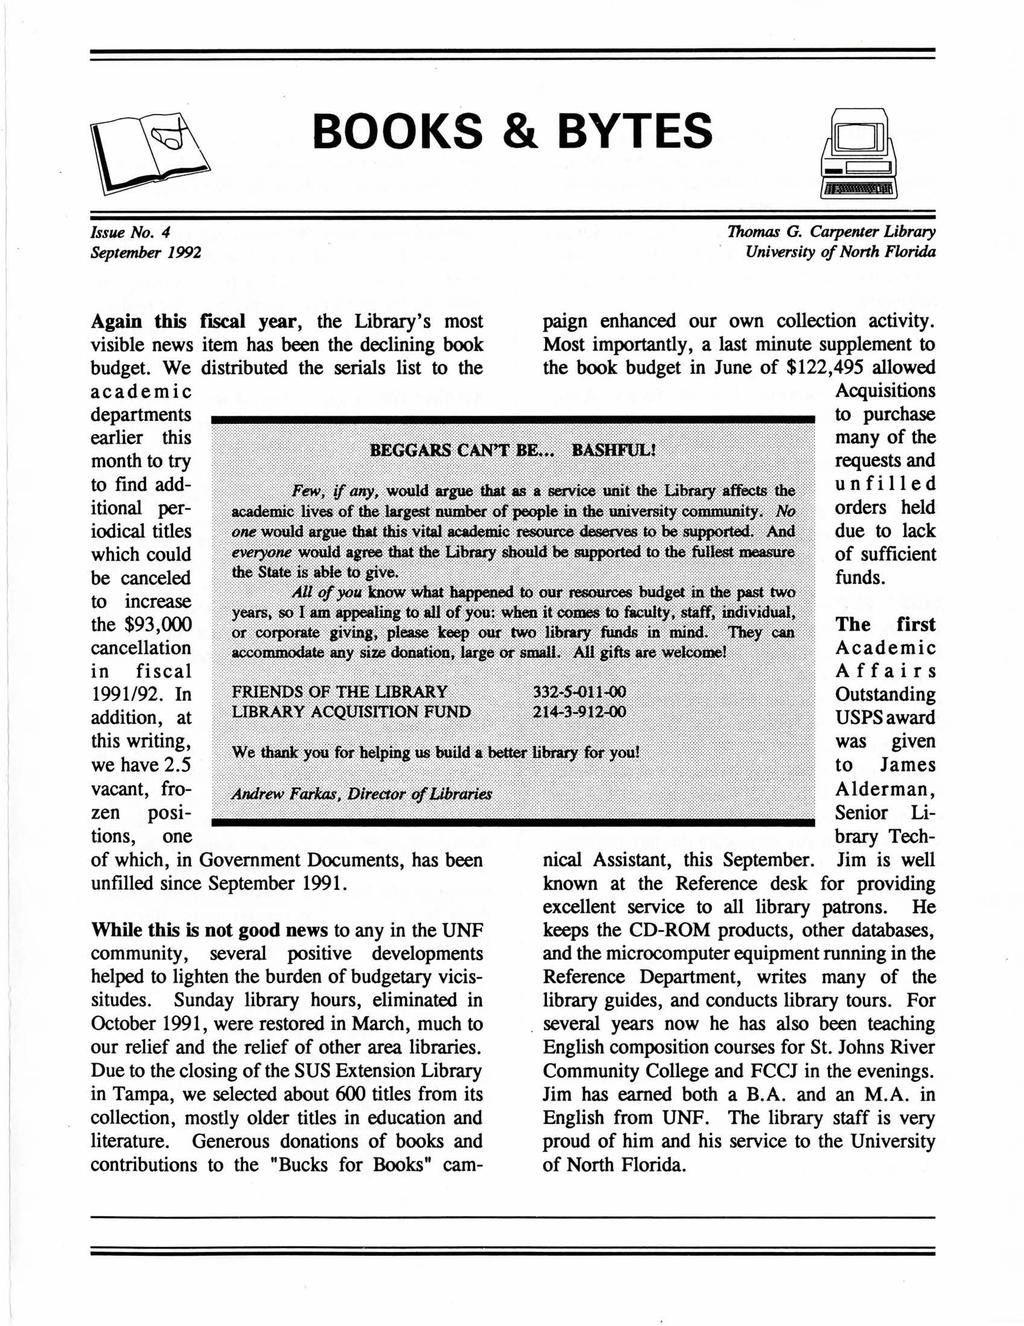 BOOKS & BYTES Issue No.4 September 1992 Thomas G. Carpenter Library University of North Florida Again this rjscal year, the Library's most visible news item has been the declining book budget.